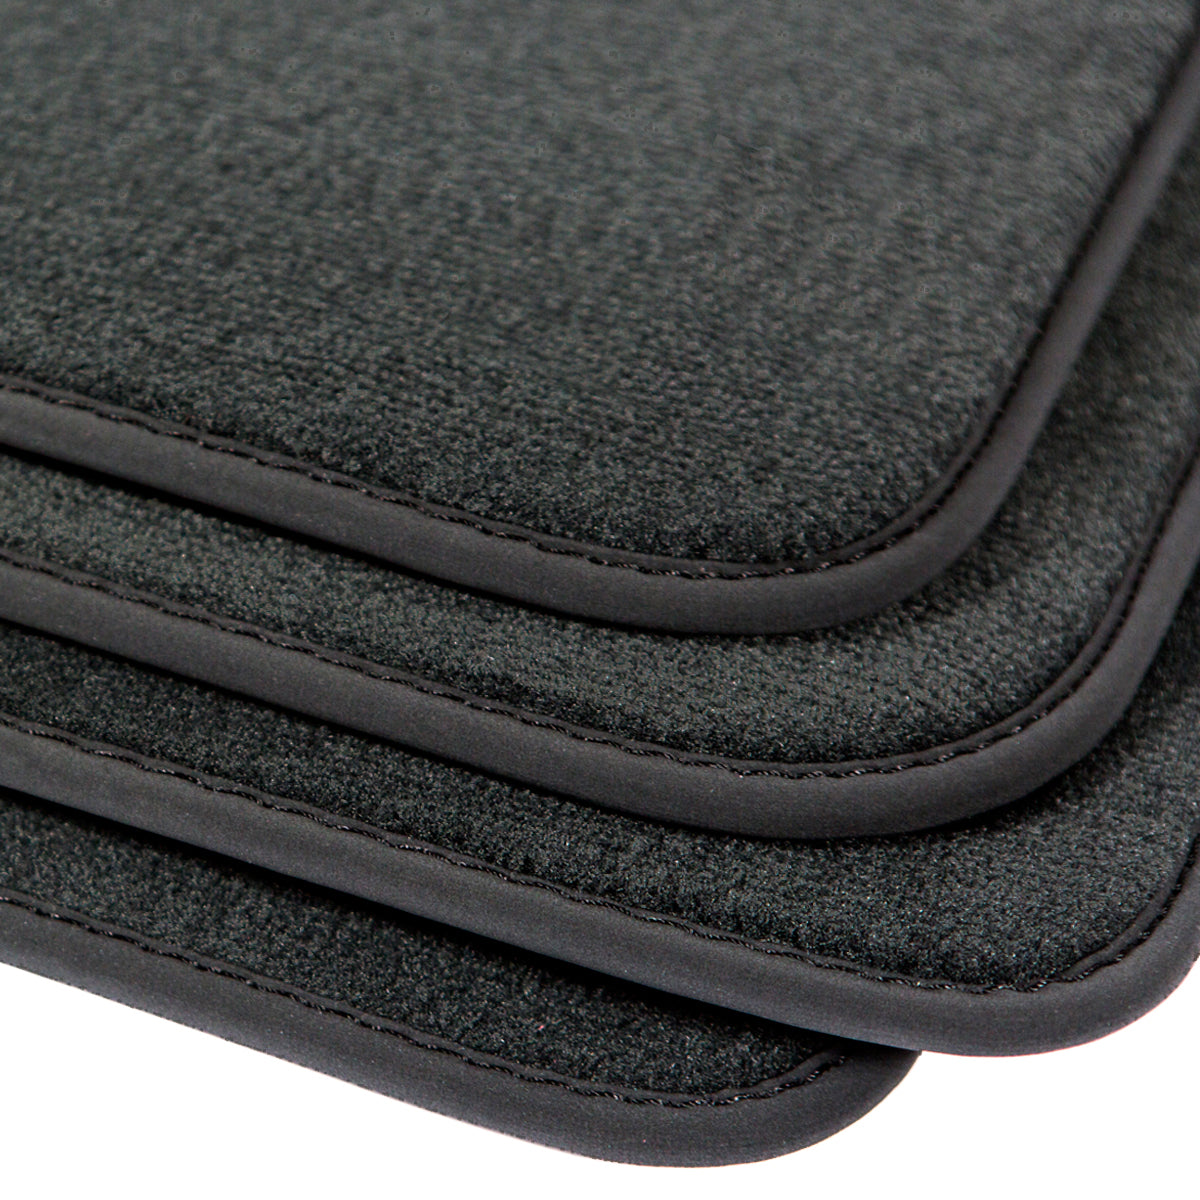 BMW 6-Series Floor Mats - Convertible & Coupe F12, F13 - Black